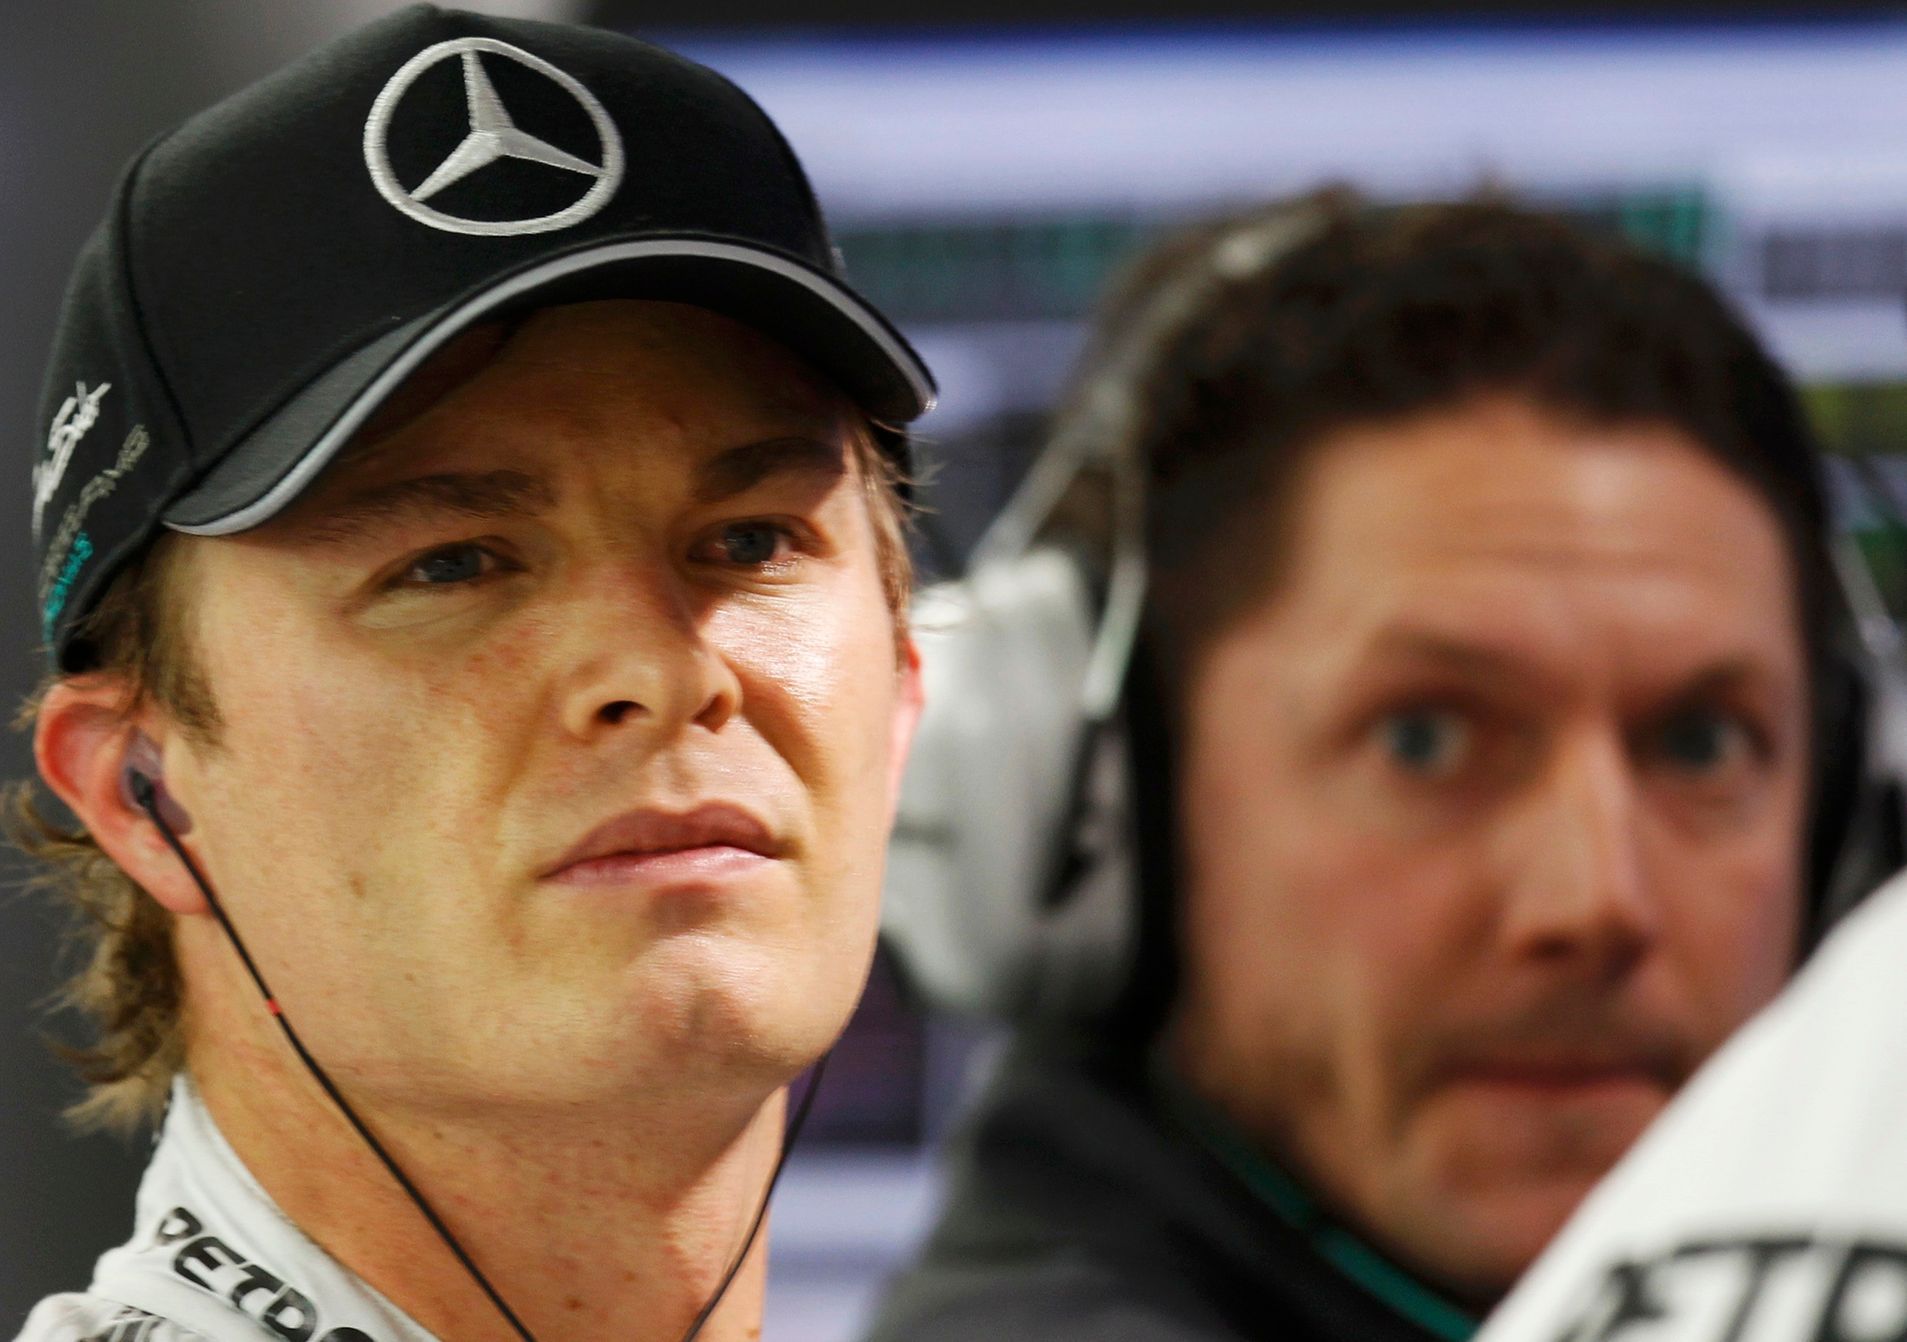 Mercedes Formula One driver Nico Rosberg of Germany looks on during the second practice session of the Bahrain F1 Grand Prix at the Bahrain International Circuit (BIC) in Sakhir